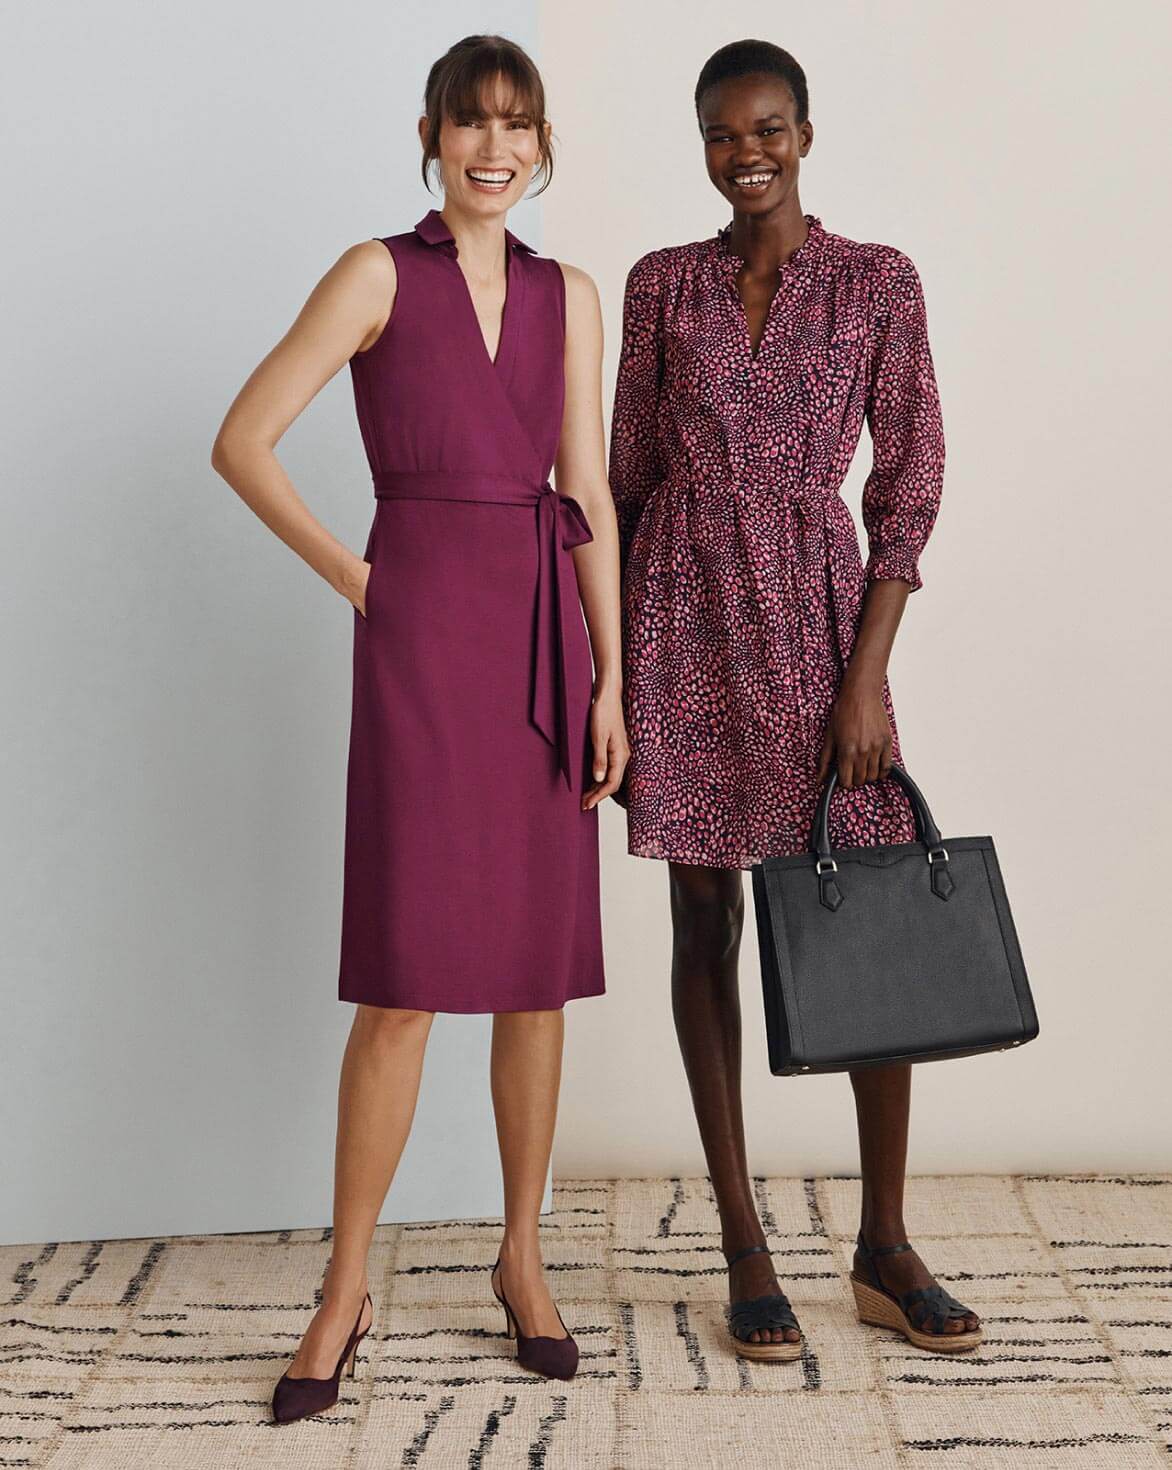 Two Hobbs models photographed wearing a plum wrap dress and pink leopard mini dress with coordinating accessories.